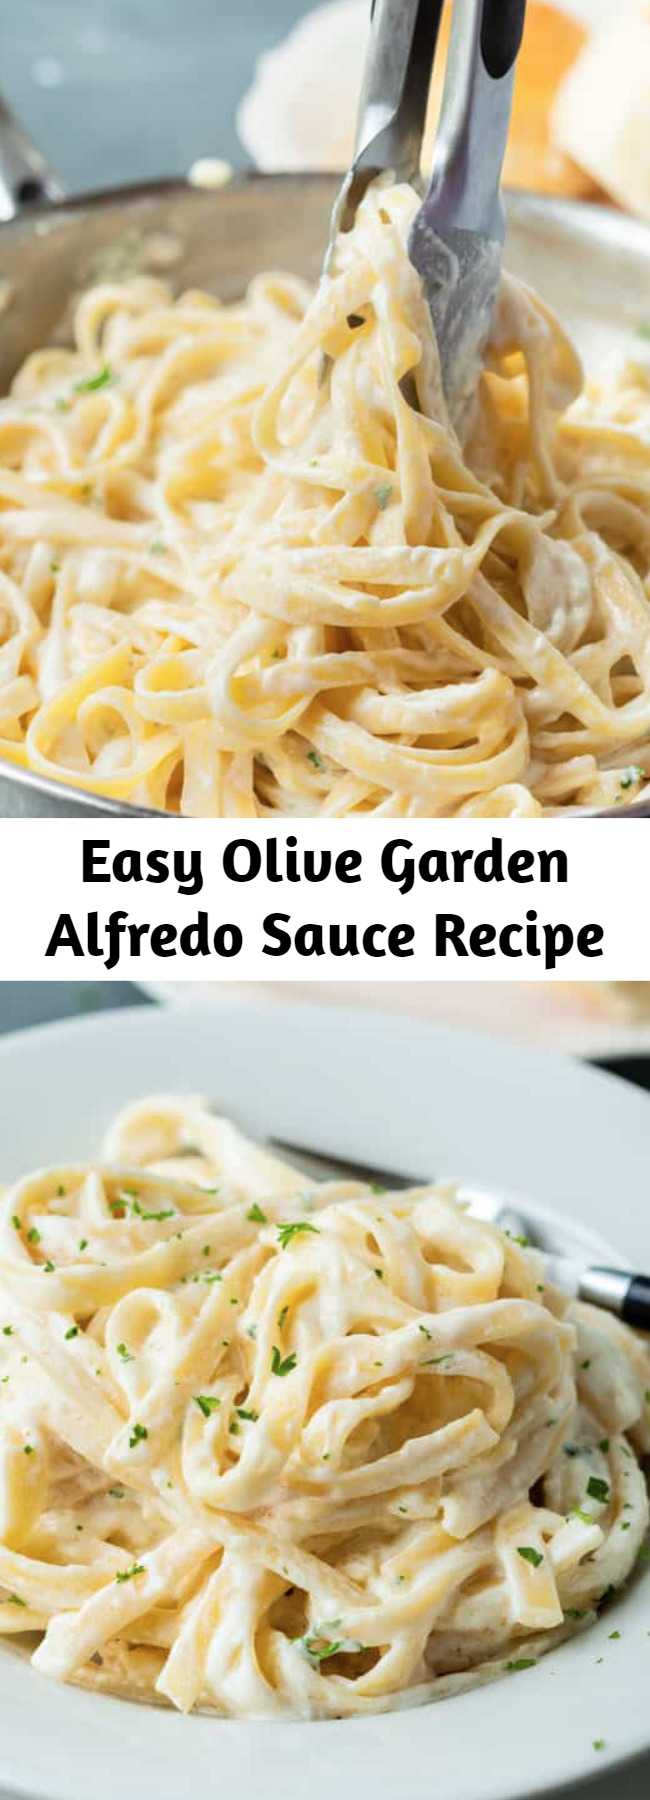 Easy Olive Garden Alfredo Sauce Recipe - Make Olive Garden's Alfredo Sauce Recipe at home in just 20 minutes! Pair it with Fettuccine for an easy dinner idea the whole family will love! #alfredo #olivegarden #fettuccine #pasta #italian #dinner